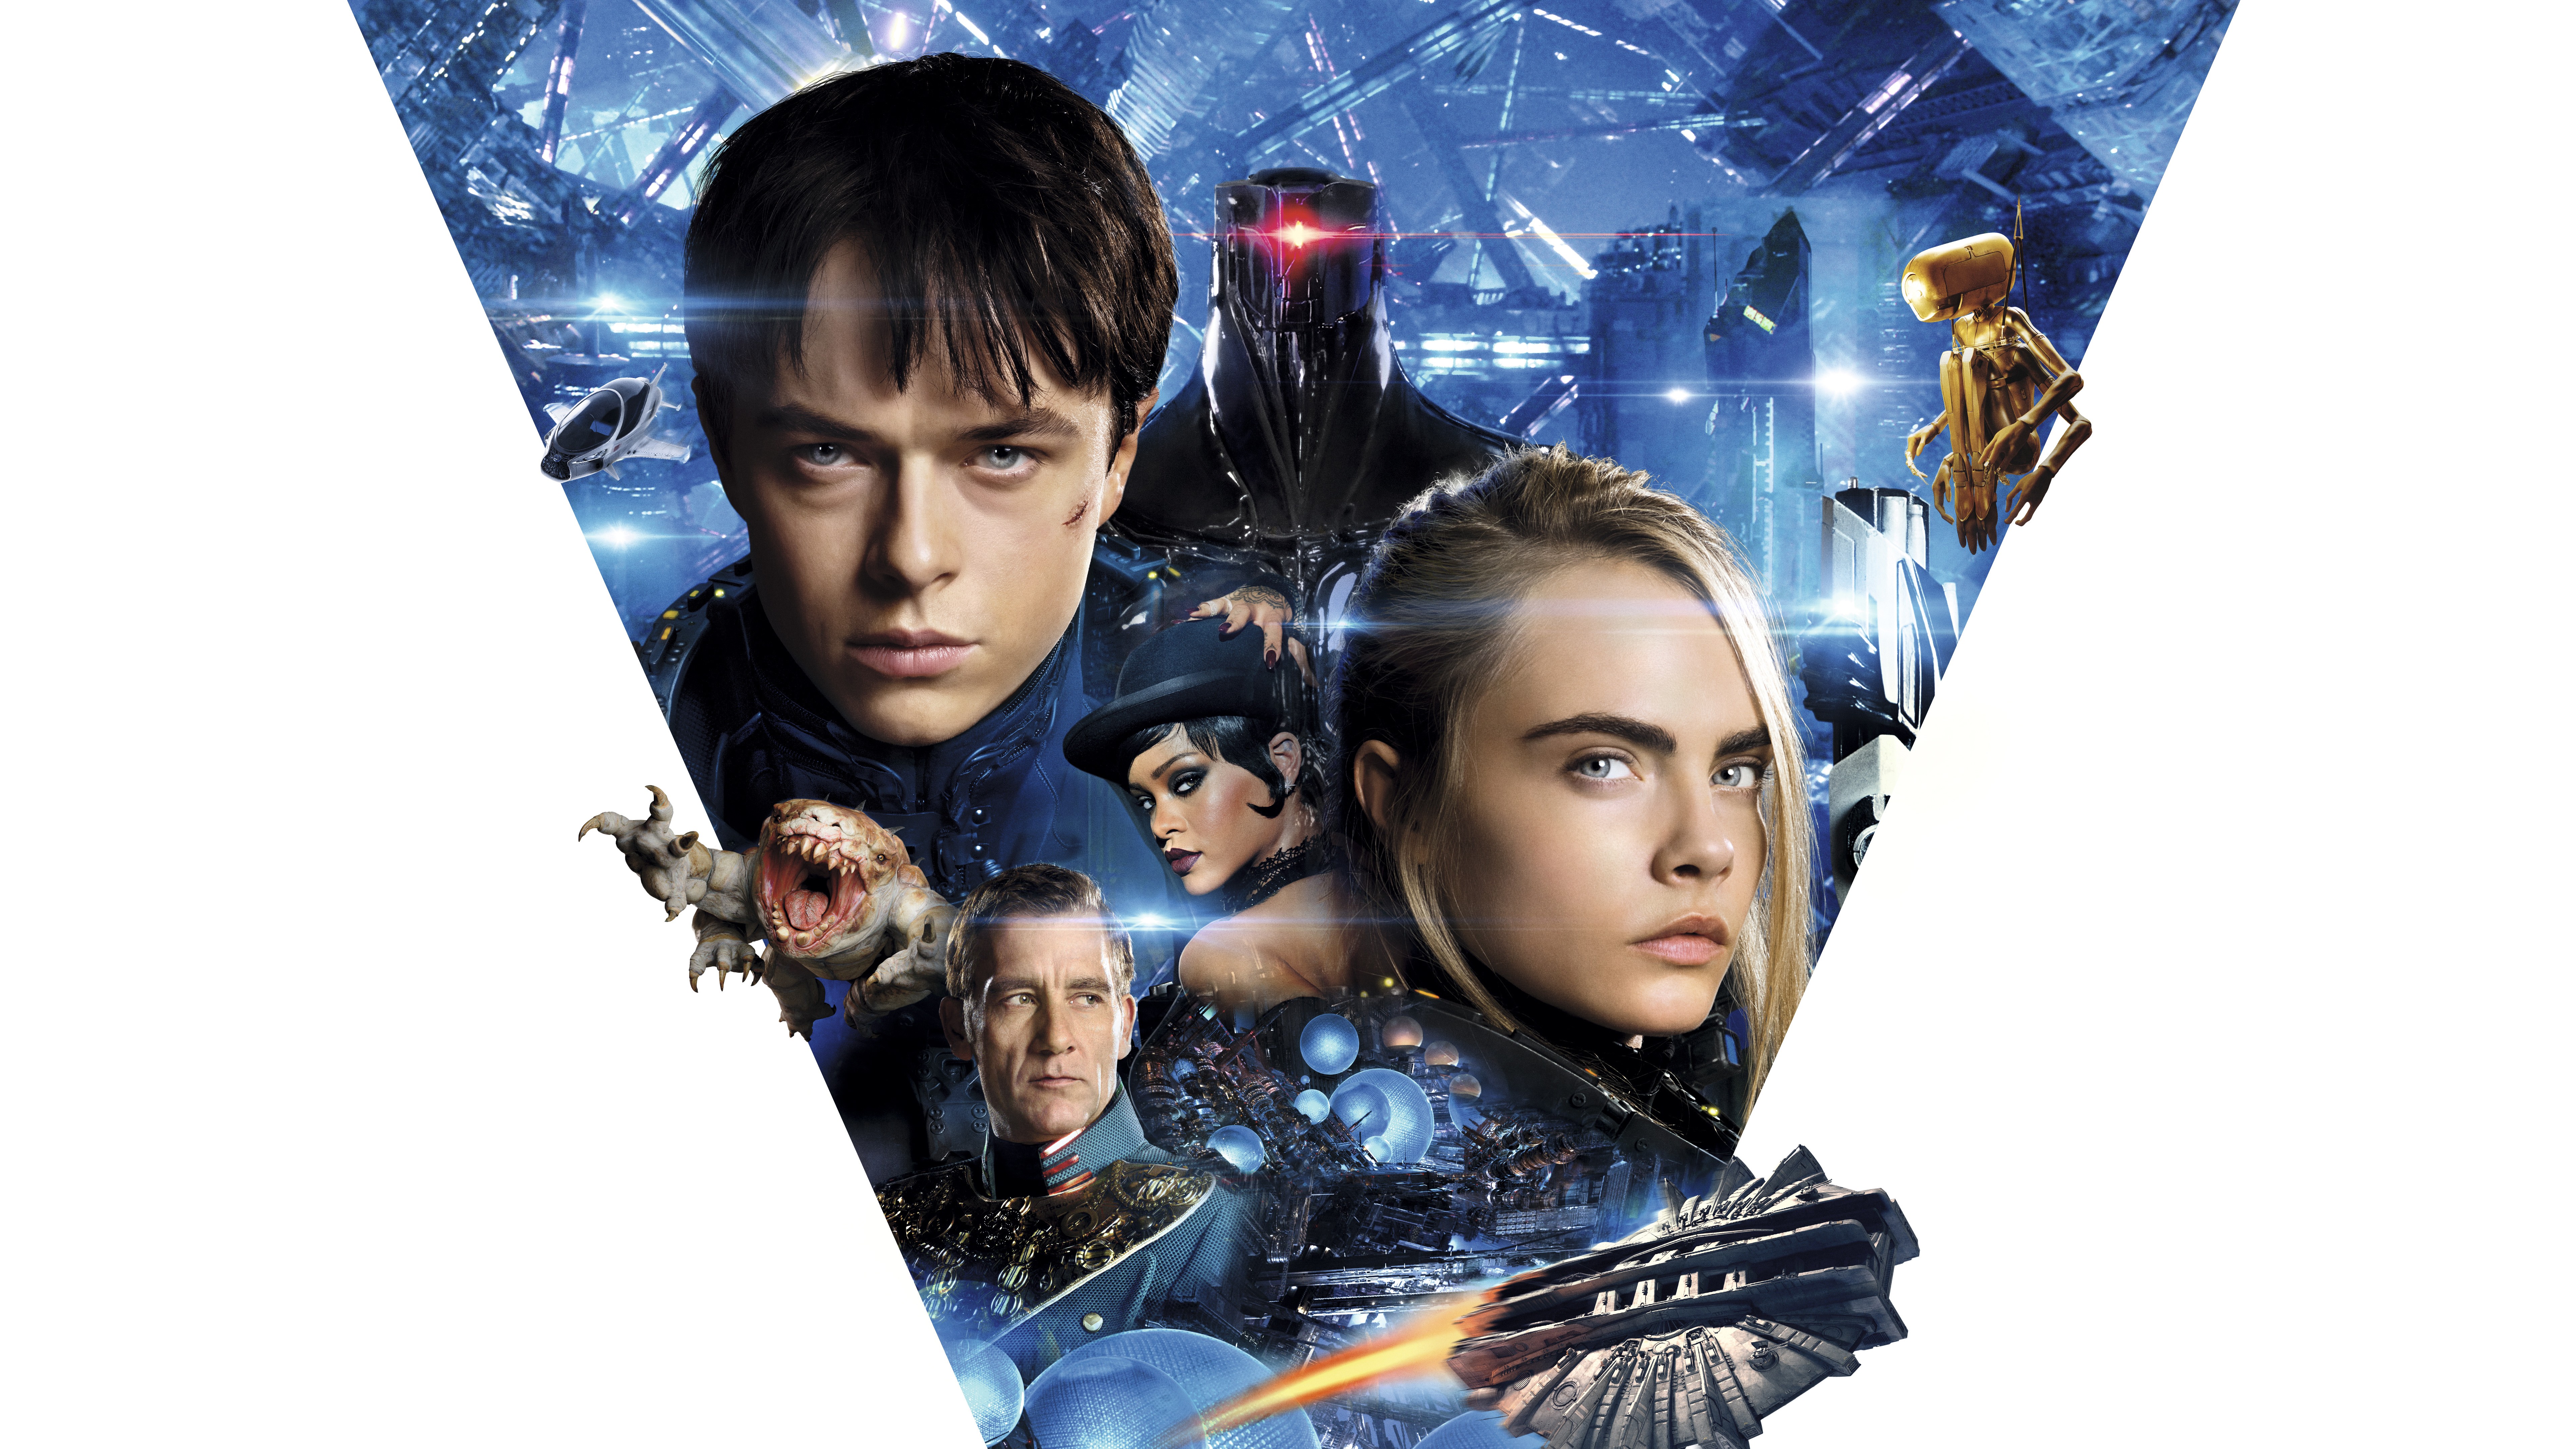 valerian_and_the_city_of_a_thousand_planets_4k_8k-7680x4320